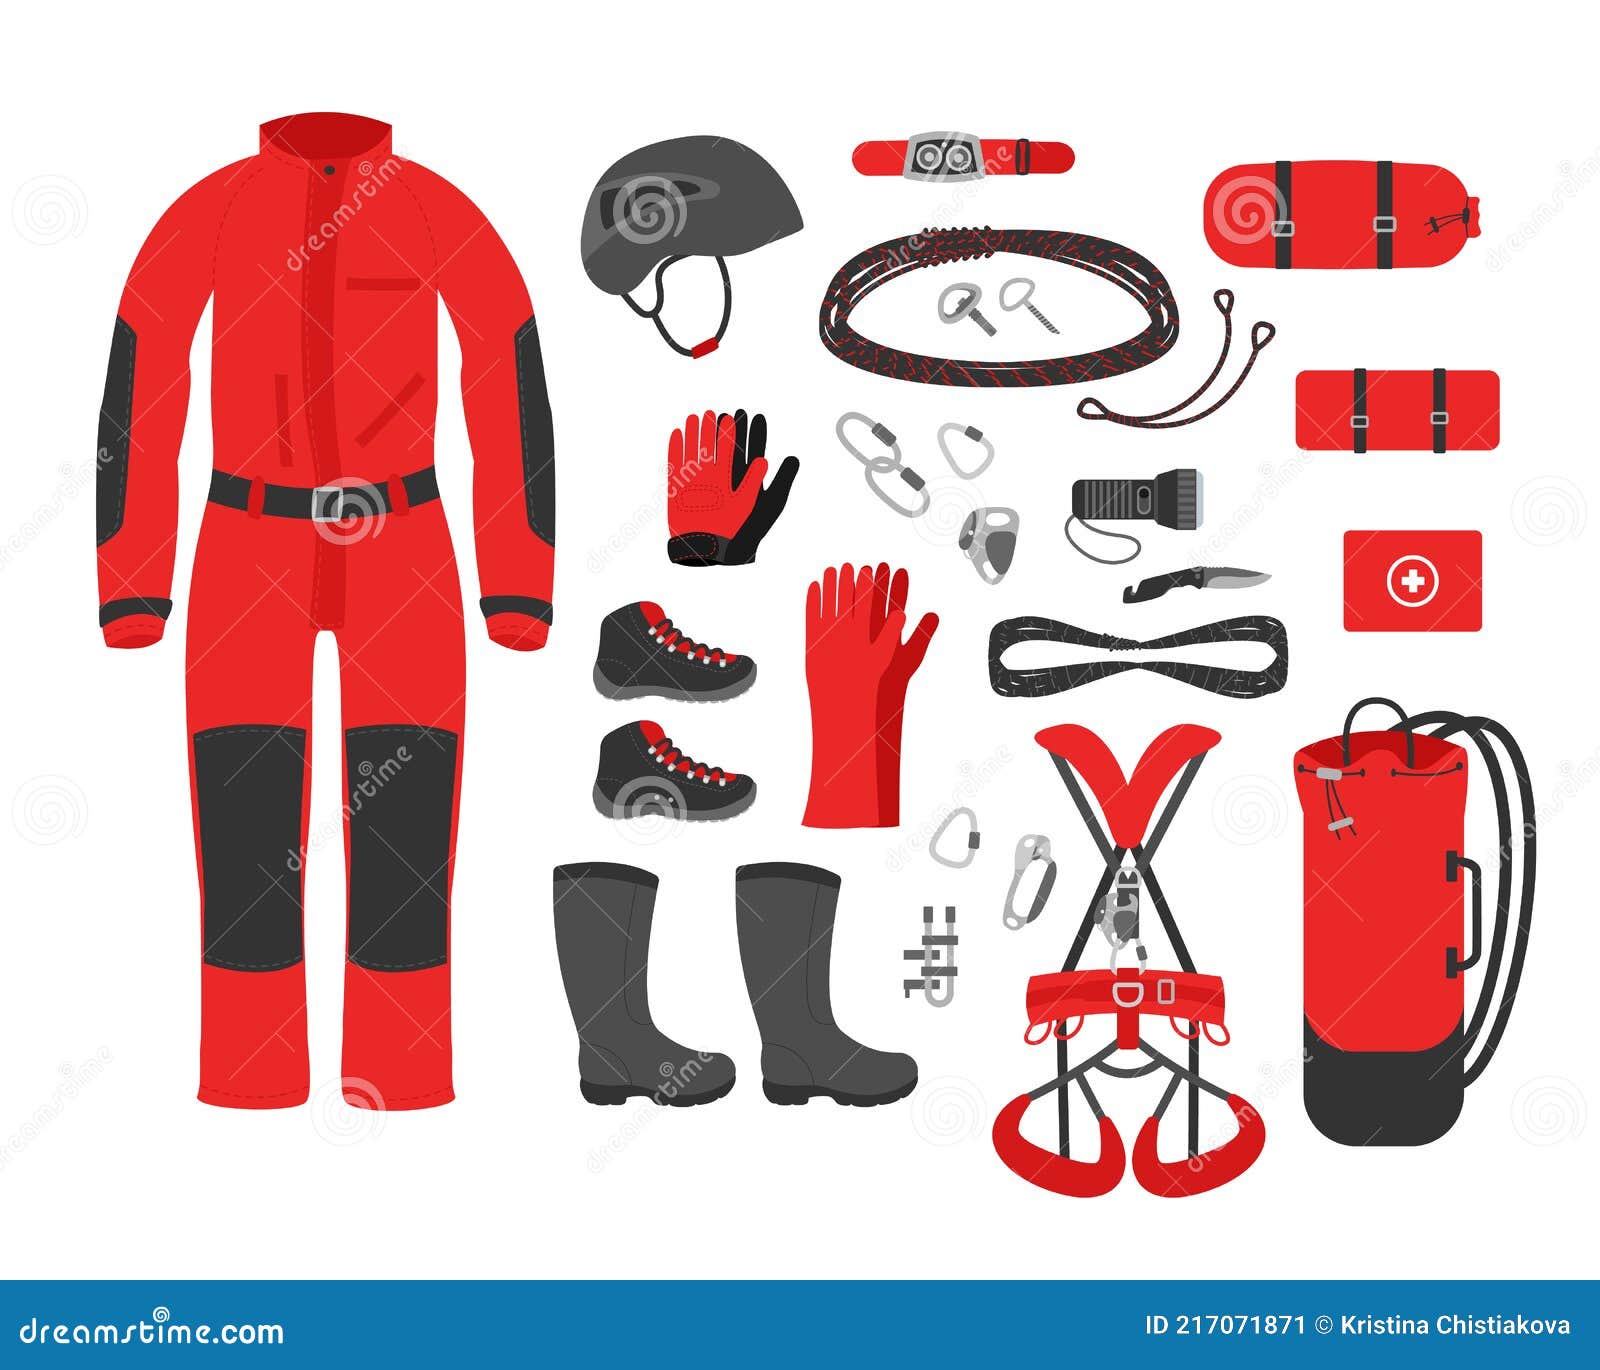 caving equipment kit clothes. speleological accessory  